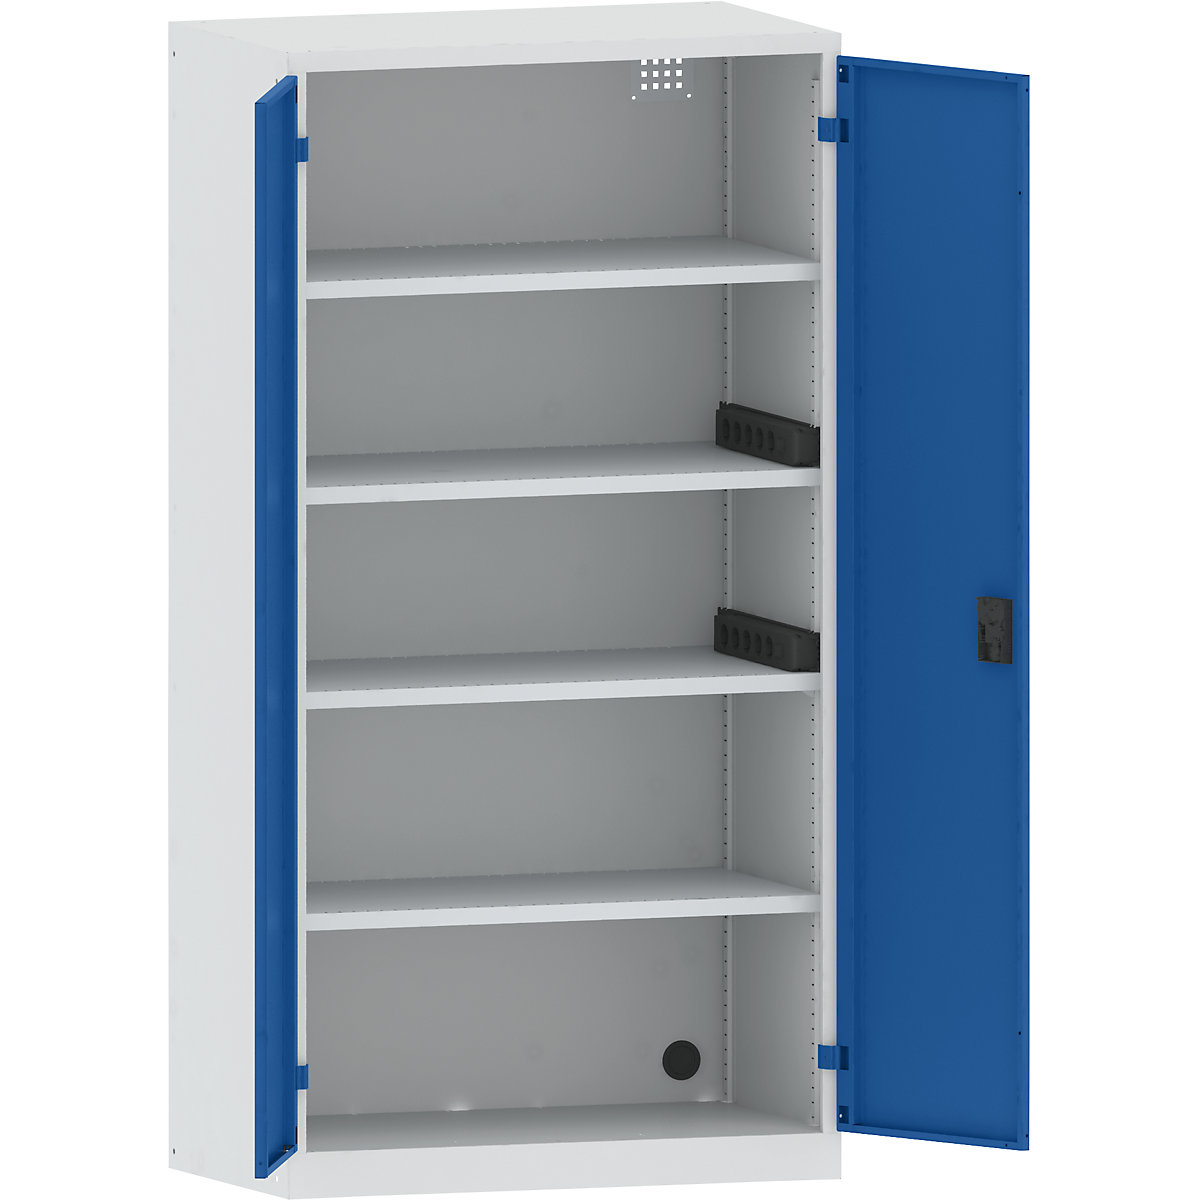 Battery charging cabinet – LISTA, 4 shelves, solid panel doors, 2 power strips at side, grey / blue-14